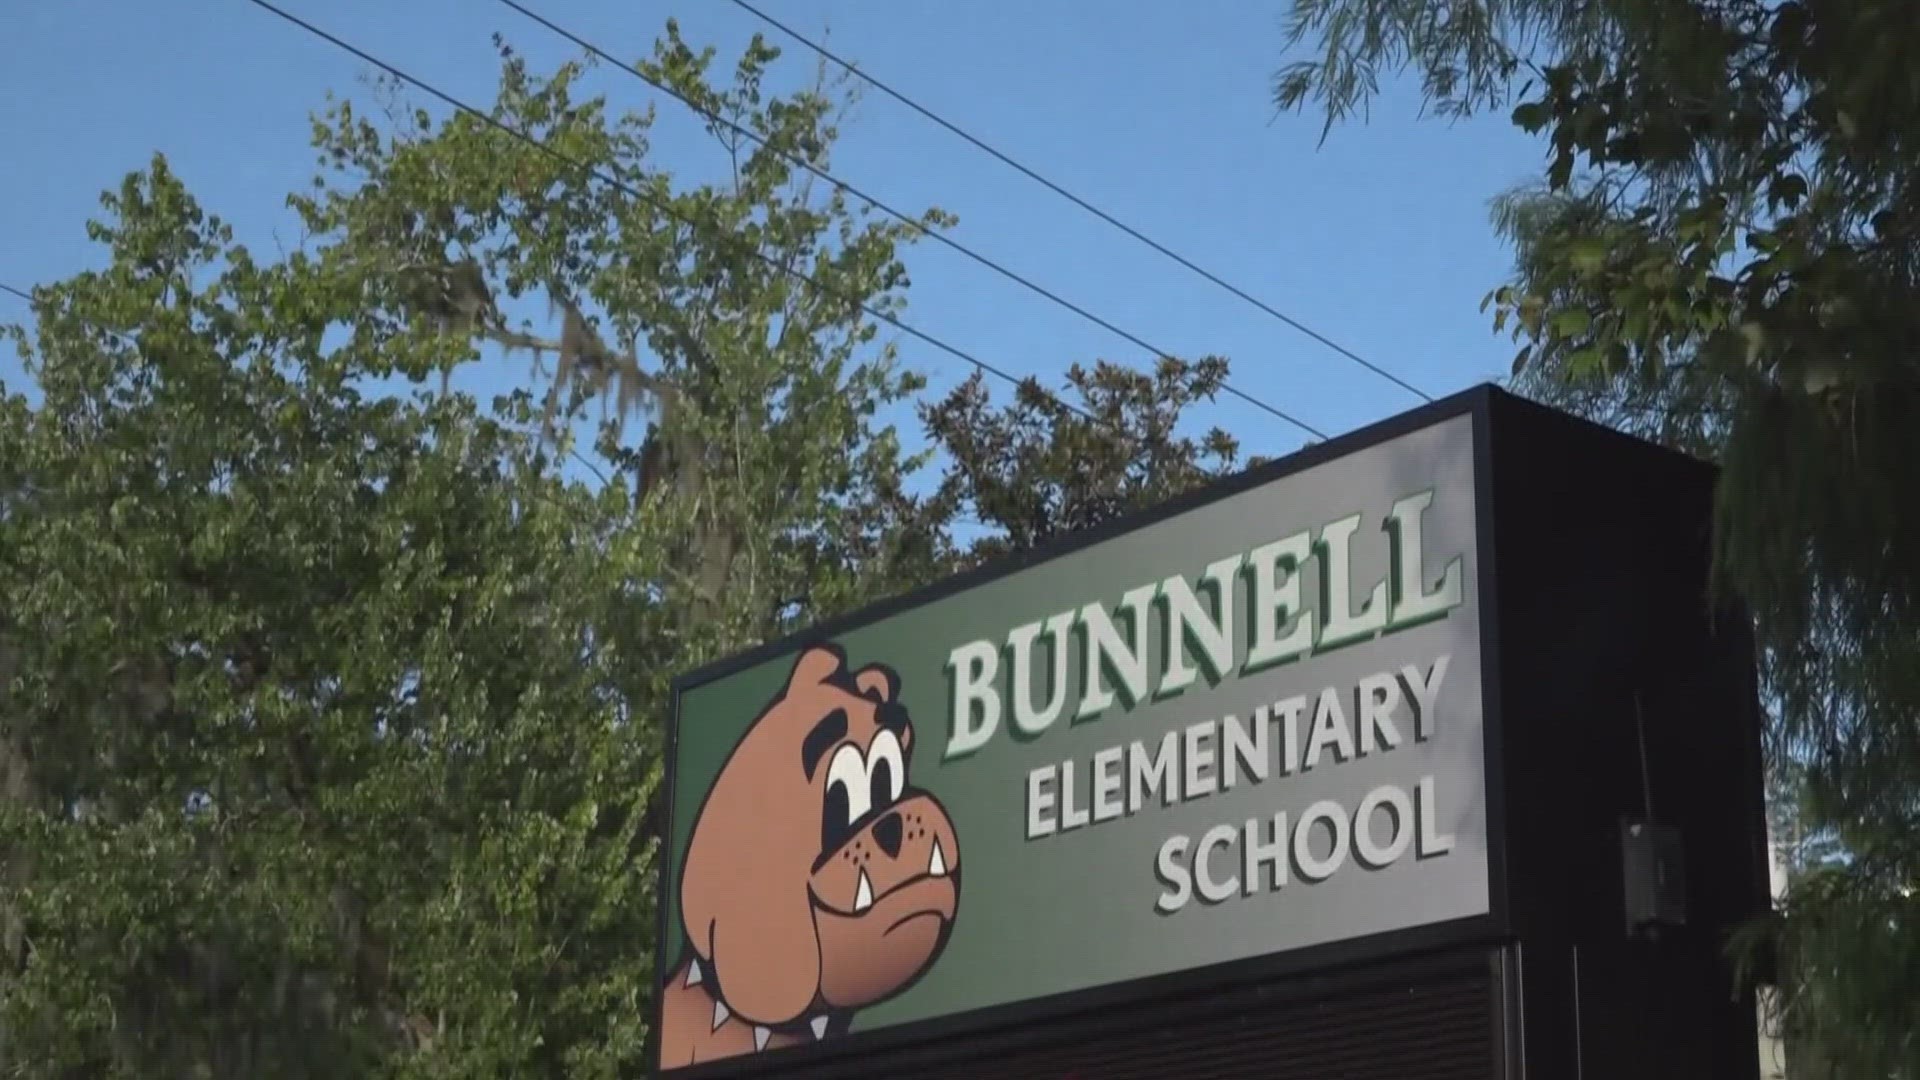 In August, a Bunnell Elementary School teacher planned assemblies targeting “lower-performing” Black students. His plan to “raise student achievement" backfired.